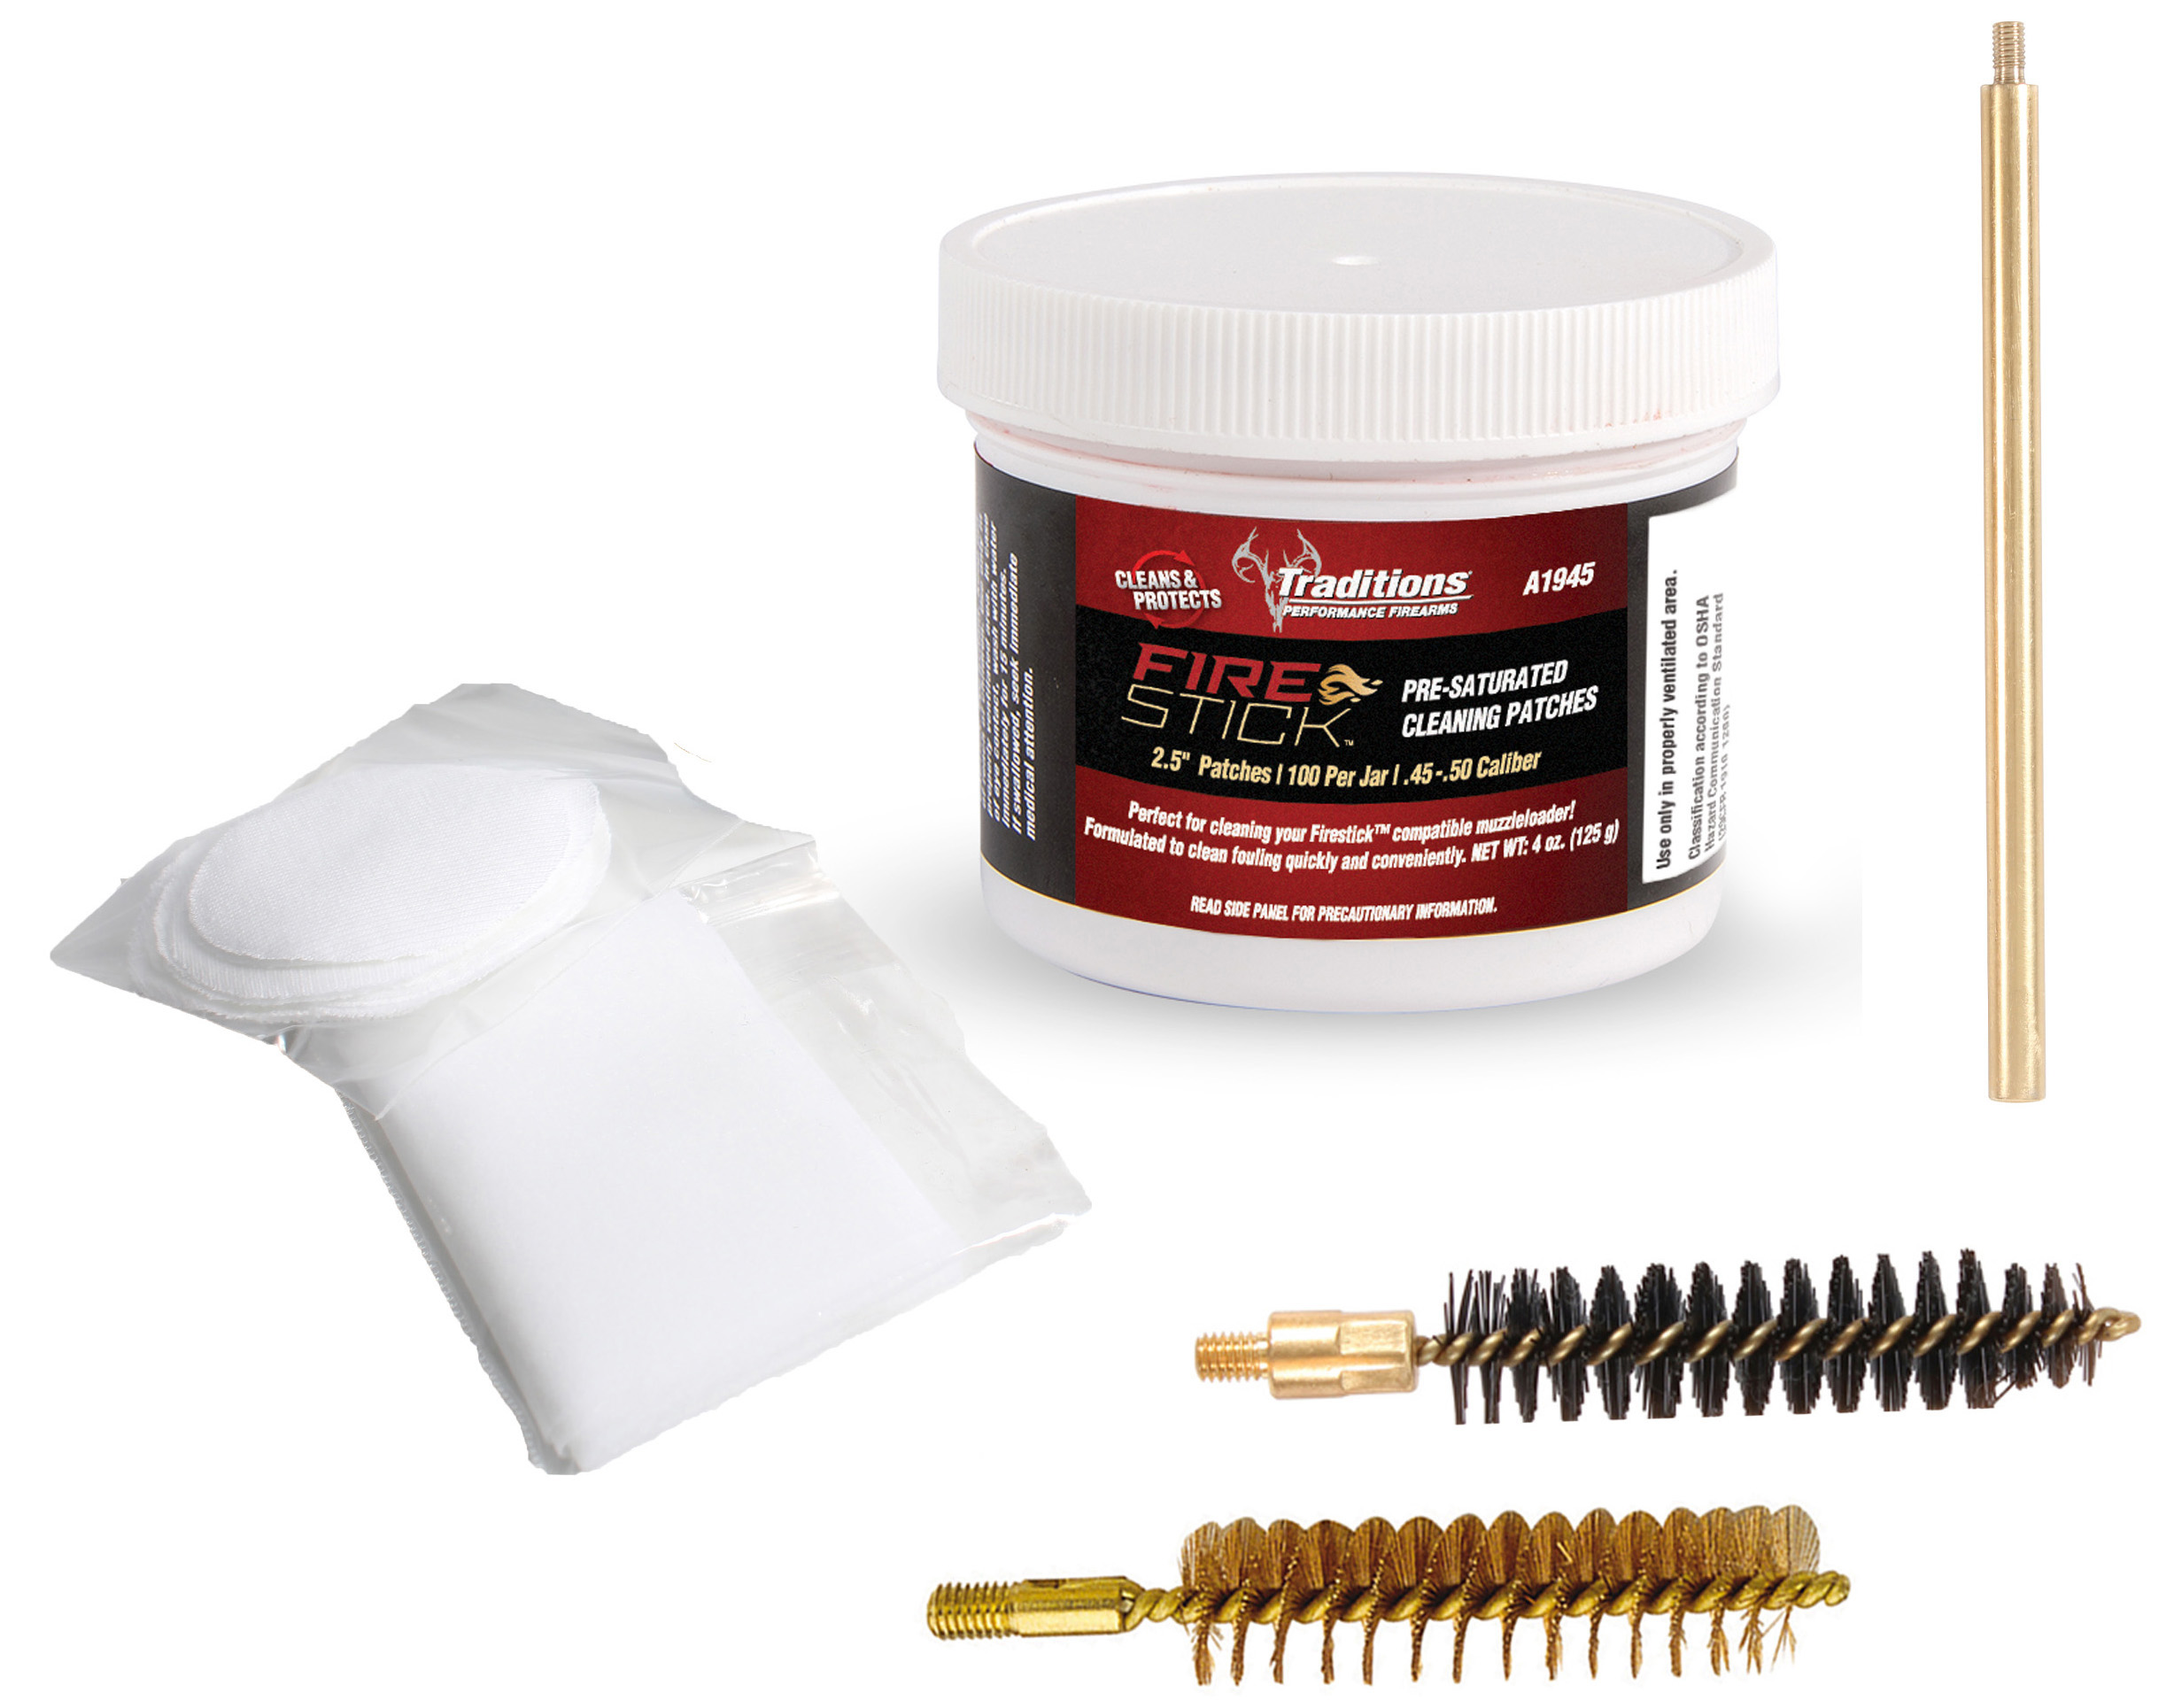 TRAD FIRESTICK CLEANING KIT